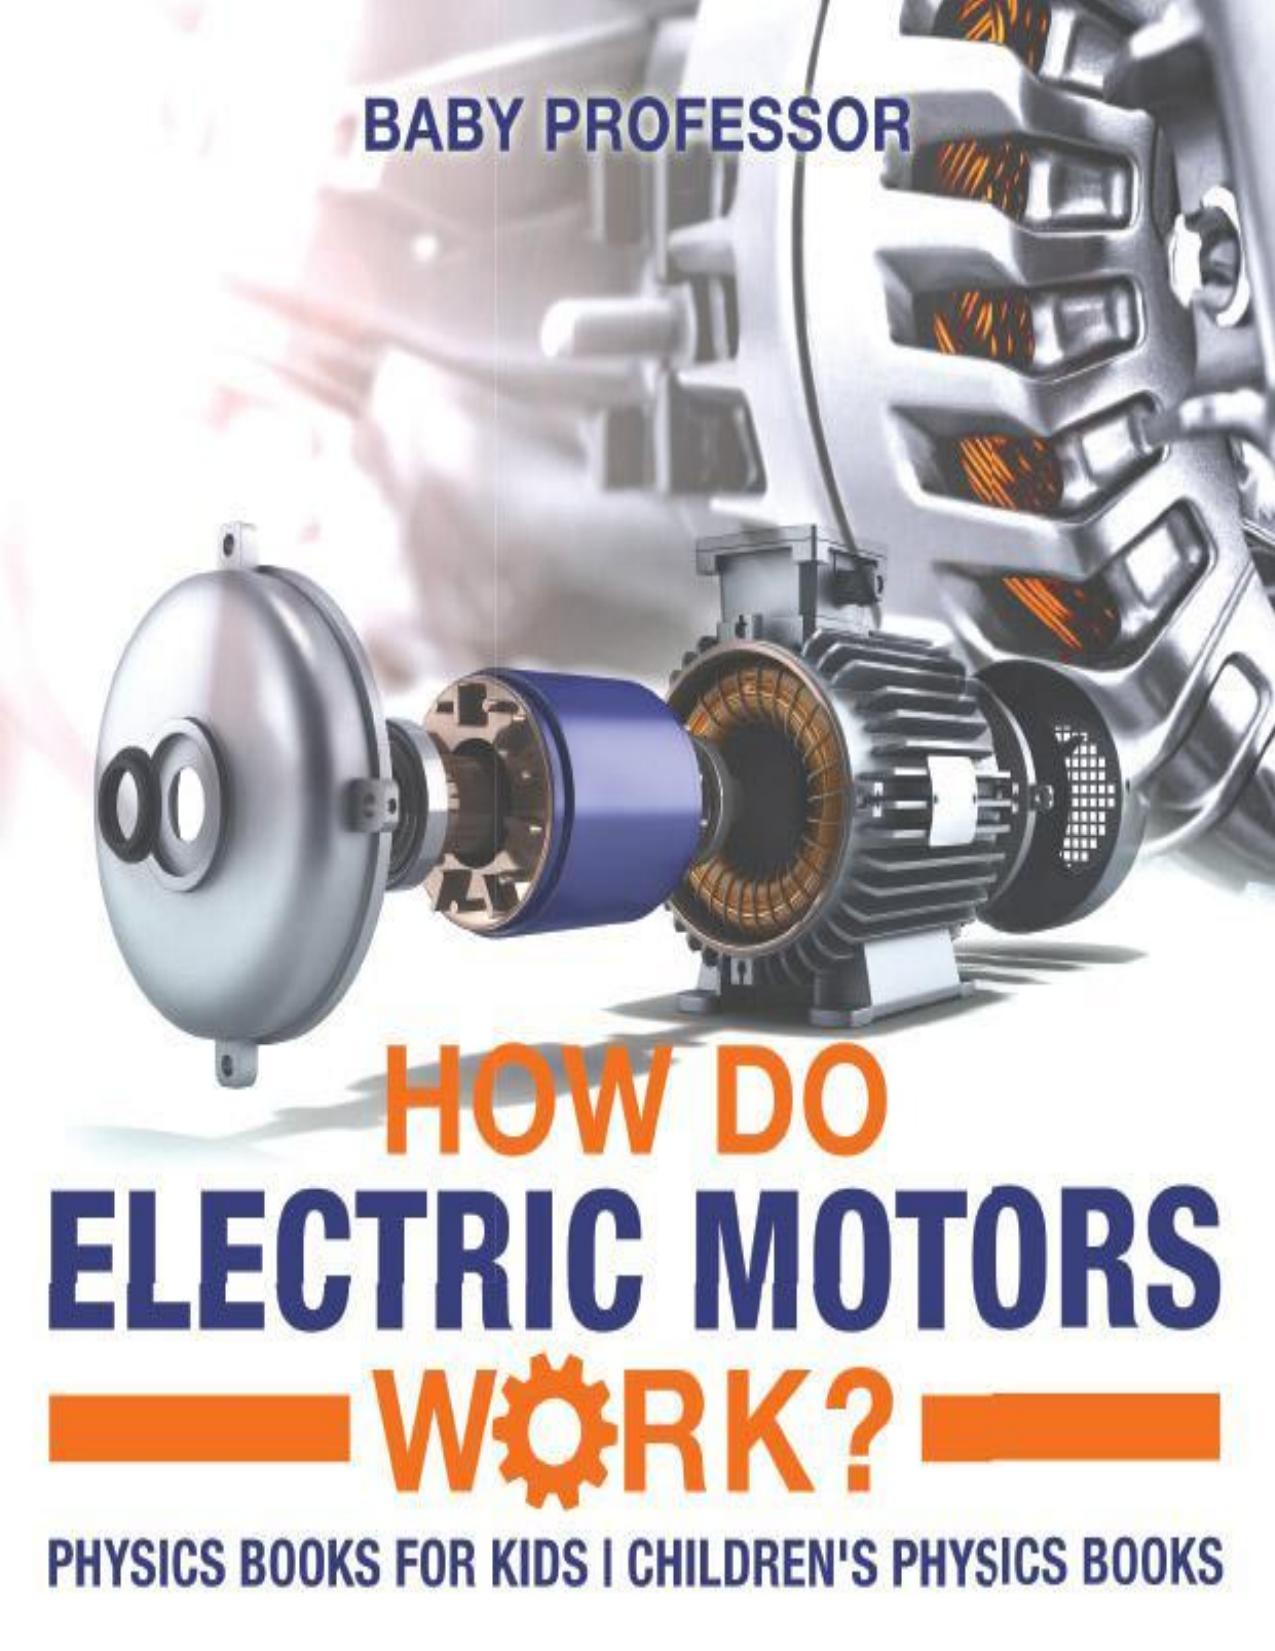 How Do Electric Motors Work? Physics Books for Kids | Children's Physics Books by Baby Professor